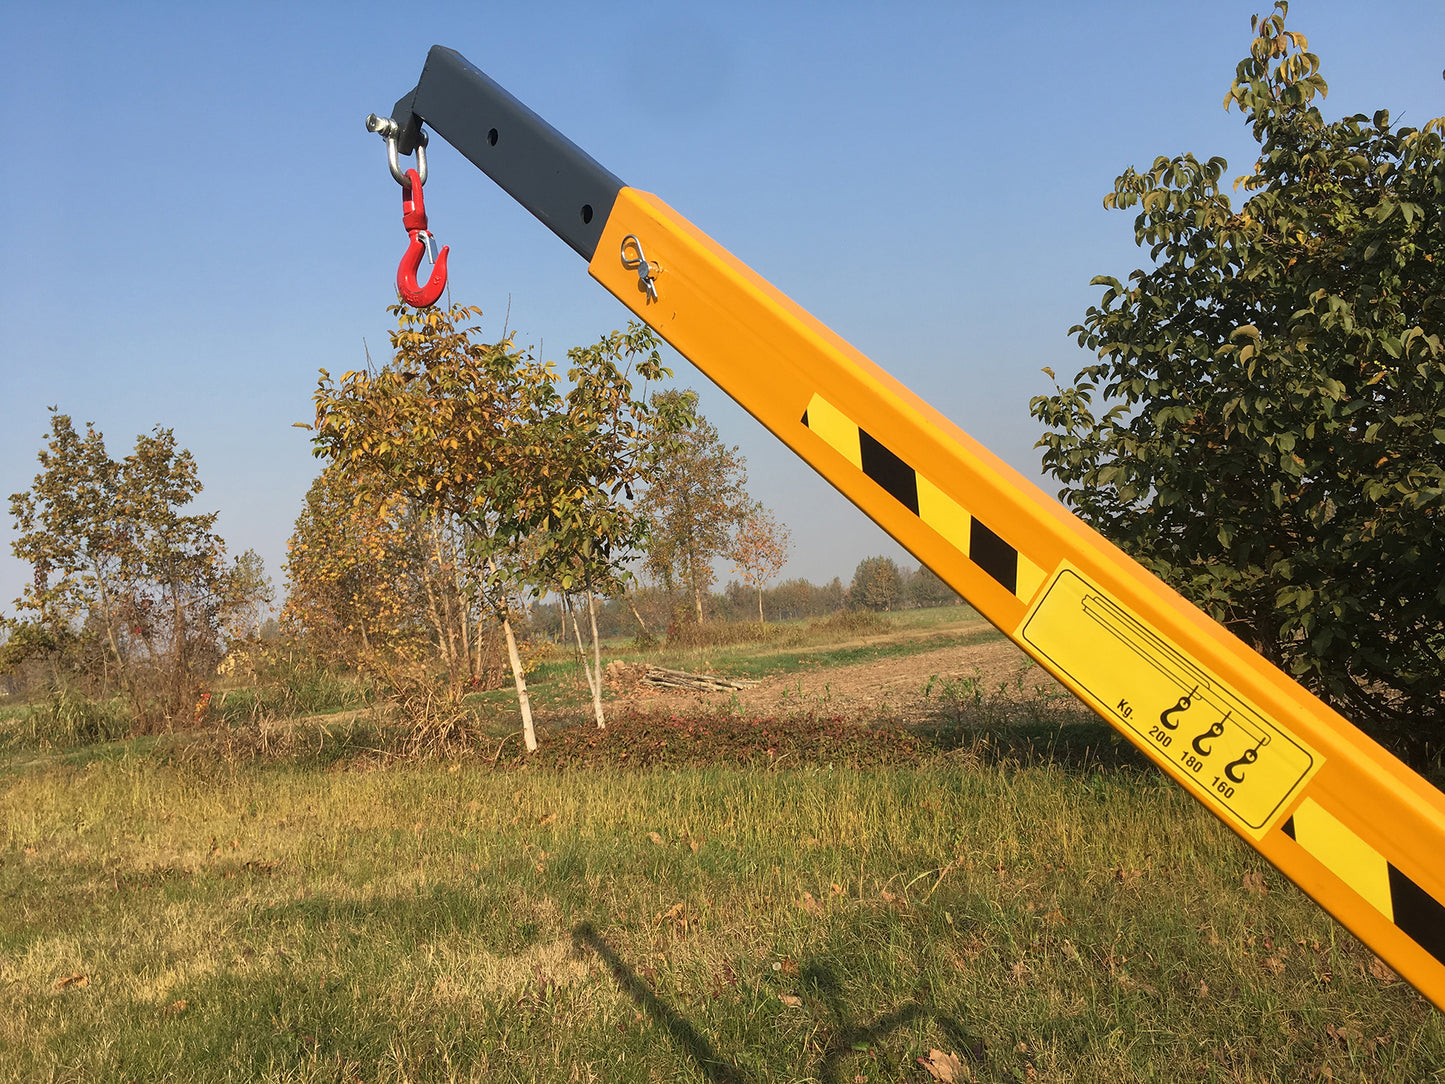 Deleks Hydraulic Cranes for Small and Compact Tractors